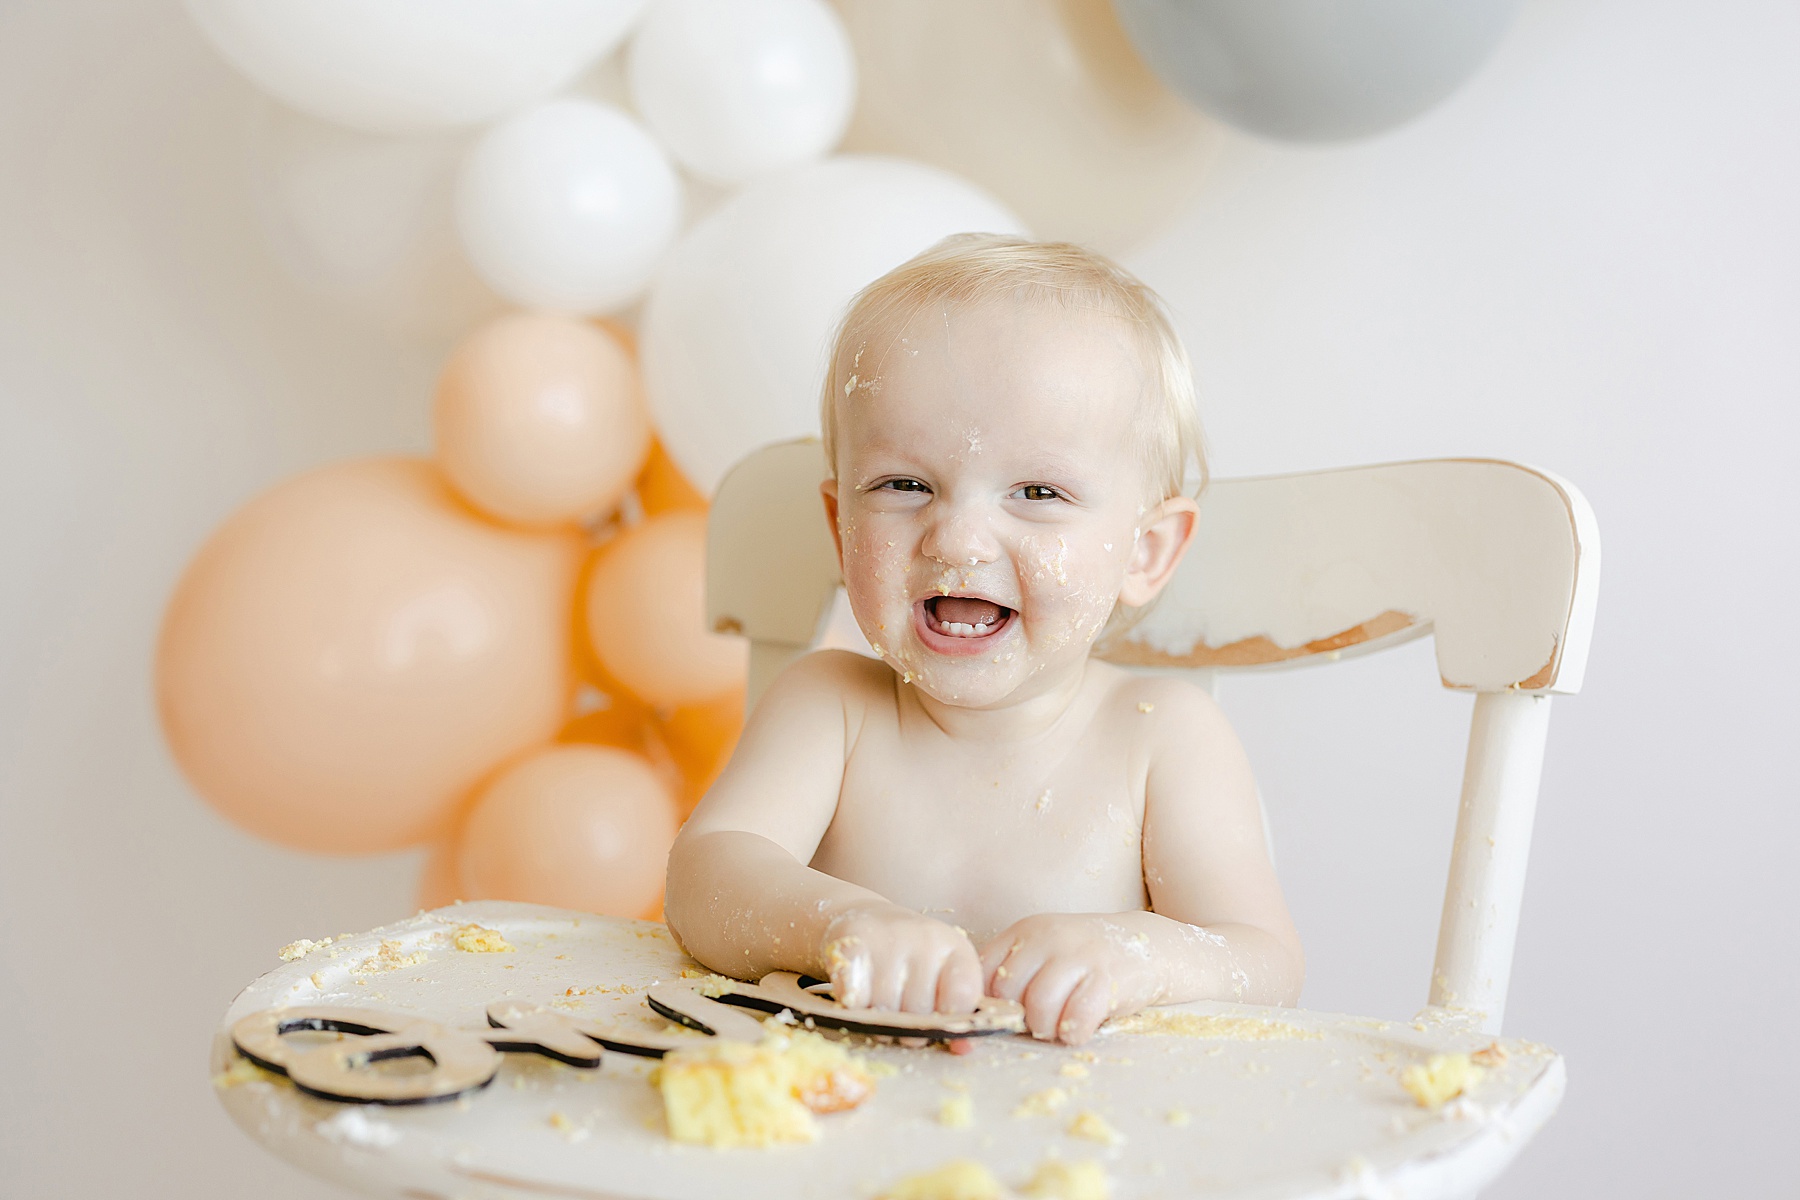 baby boy with cake all over his face sitting in white high chair with balloons in background